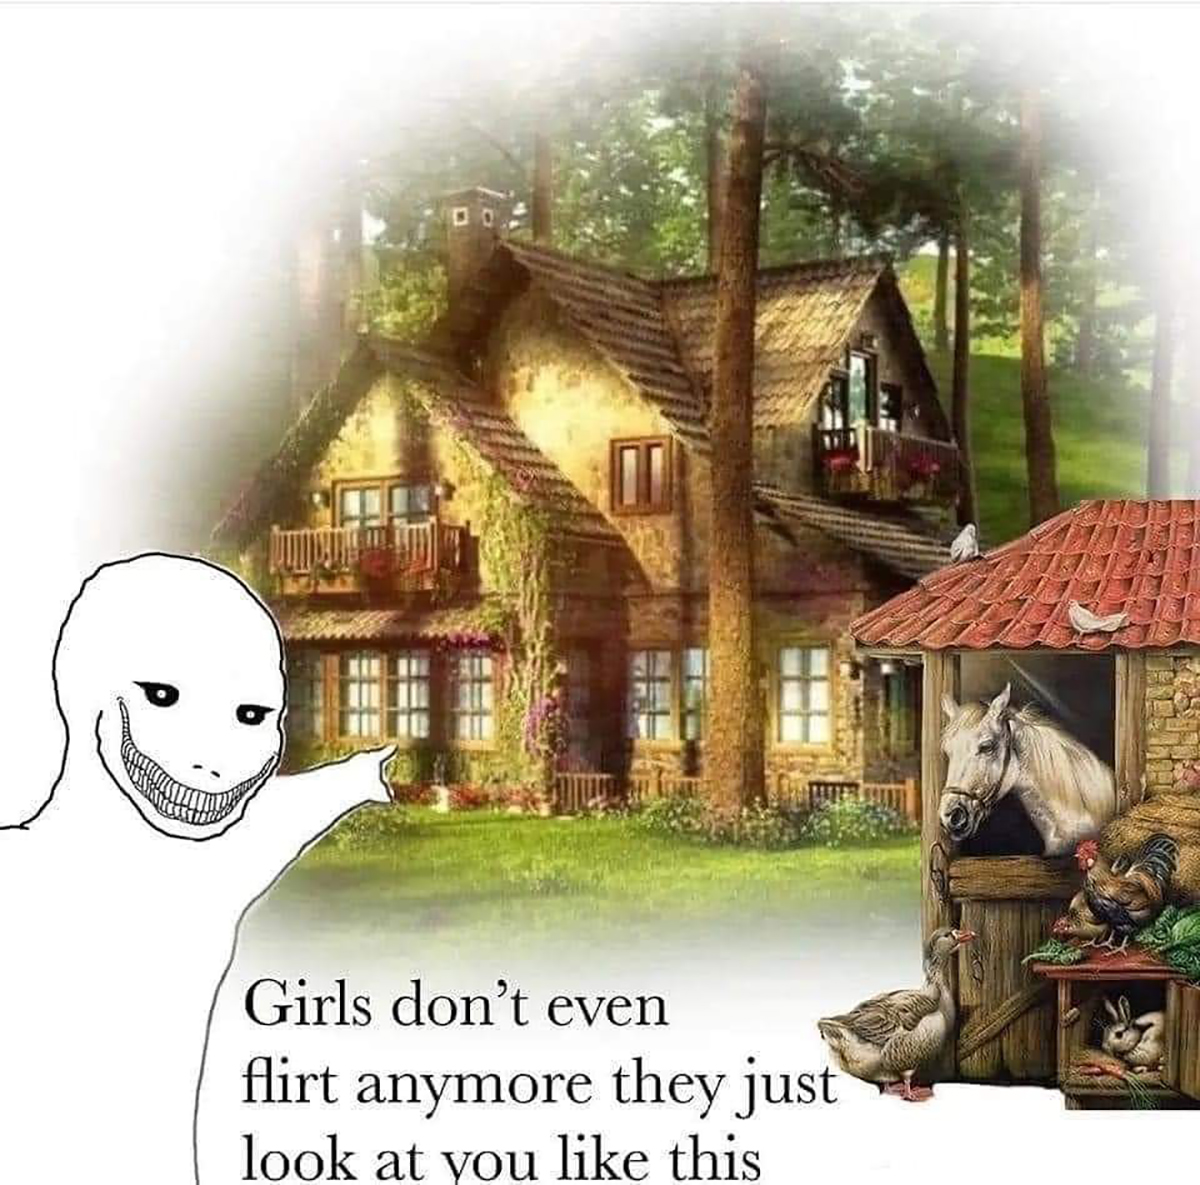 monday memes - house - Girls don't even flirt anymore they just look at you this